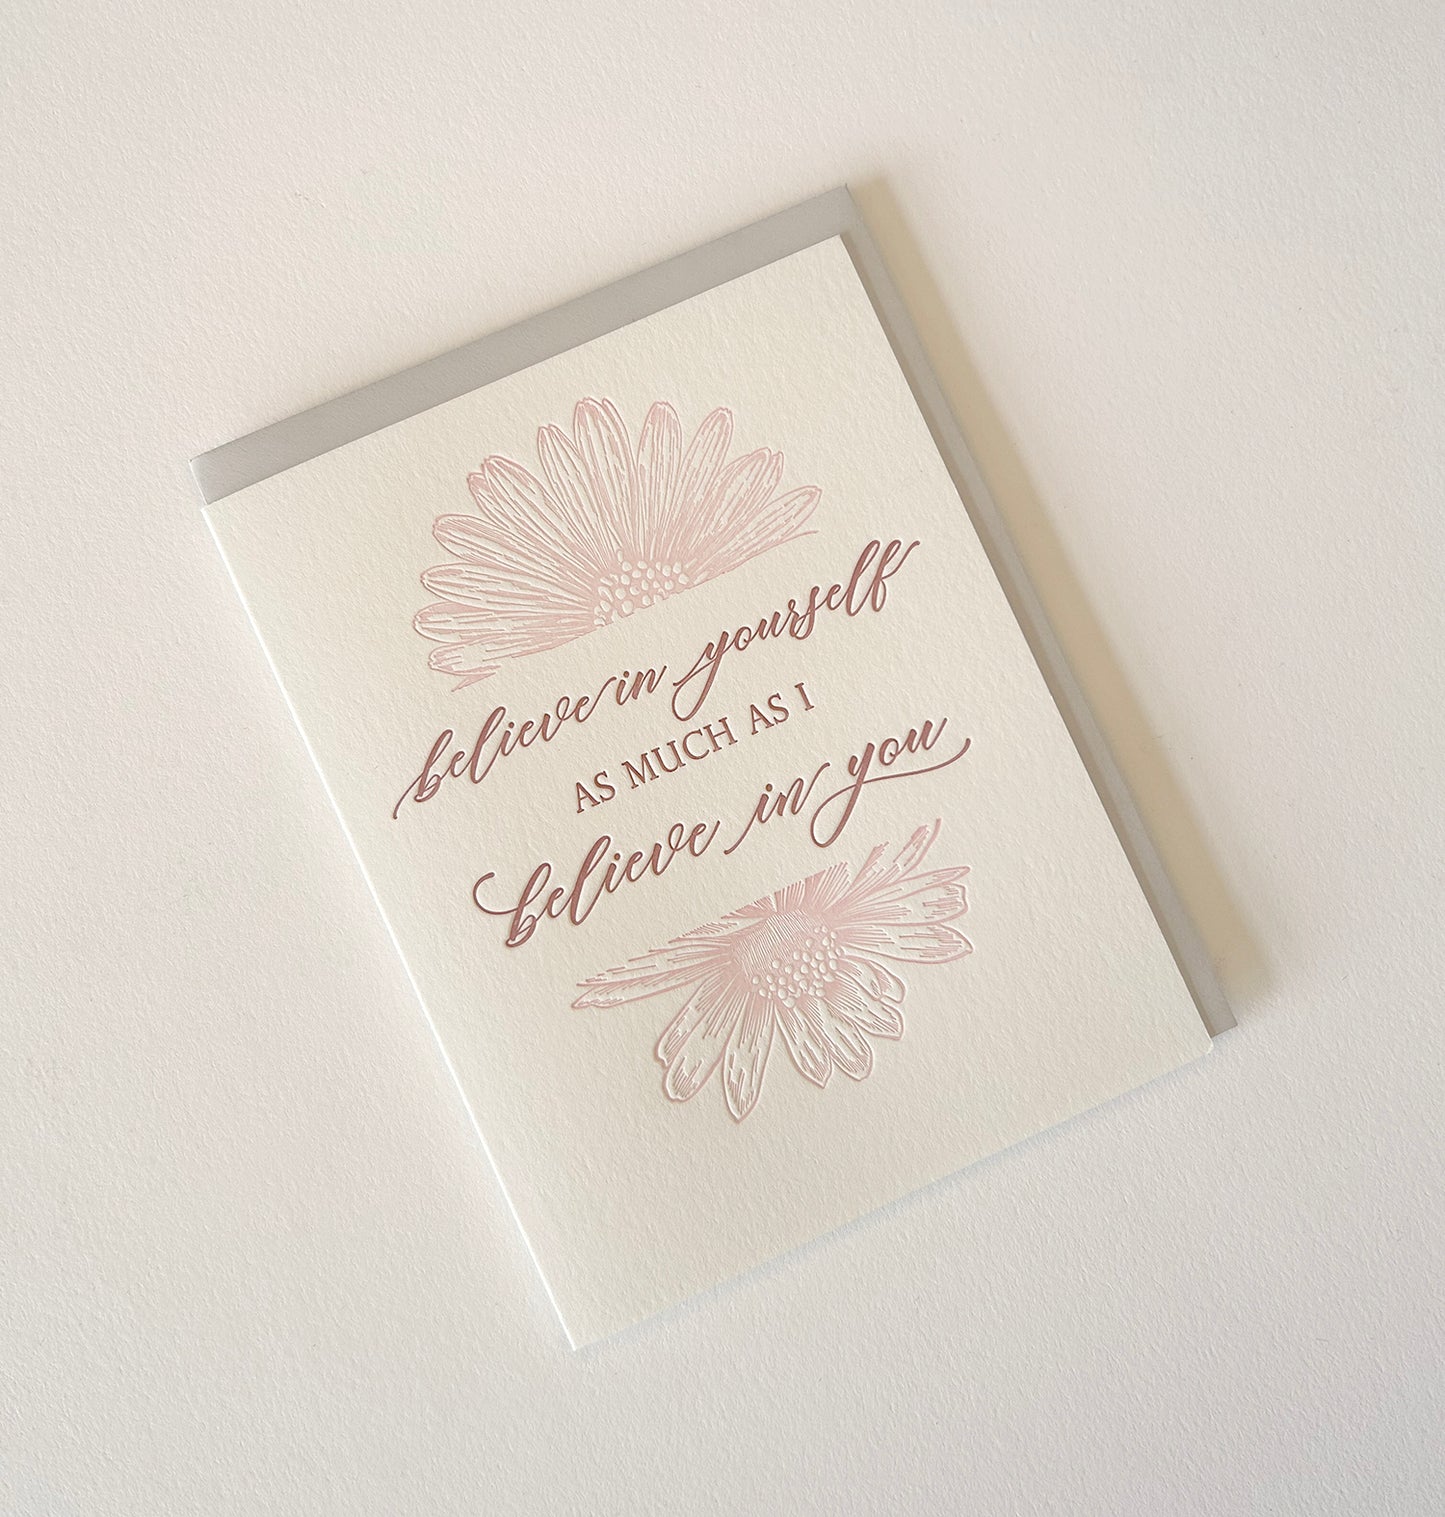 Letterpress encouragement card with florals that says " Believe in Yourself As Much As I Believe In You" by Rust Belt Love